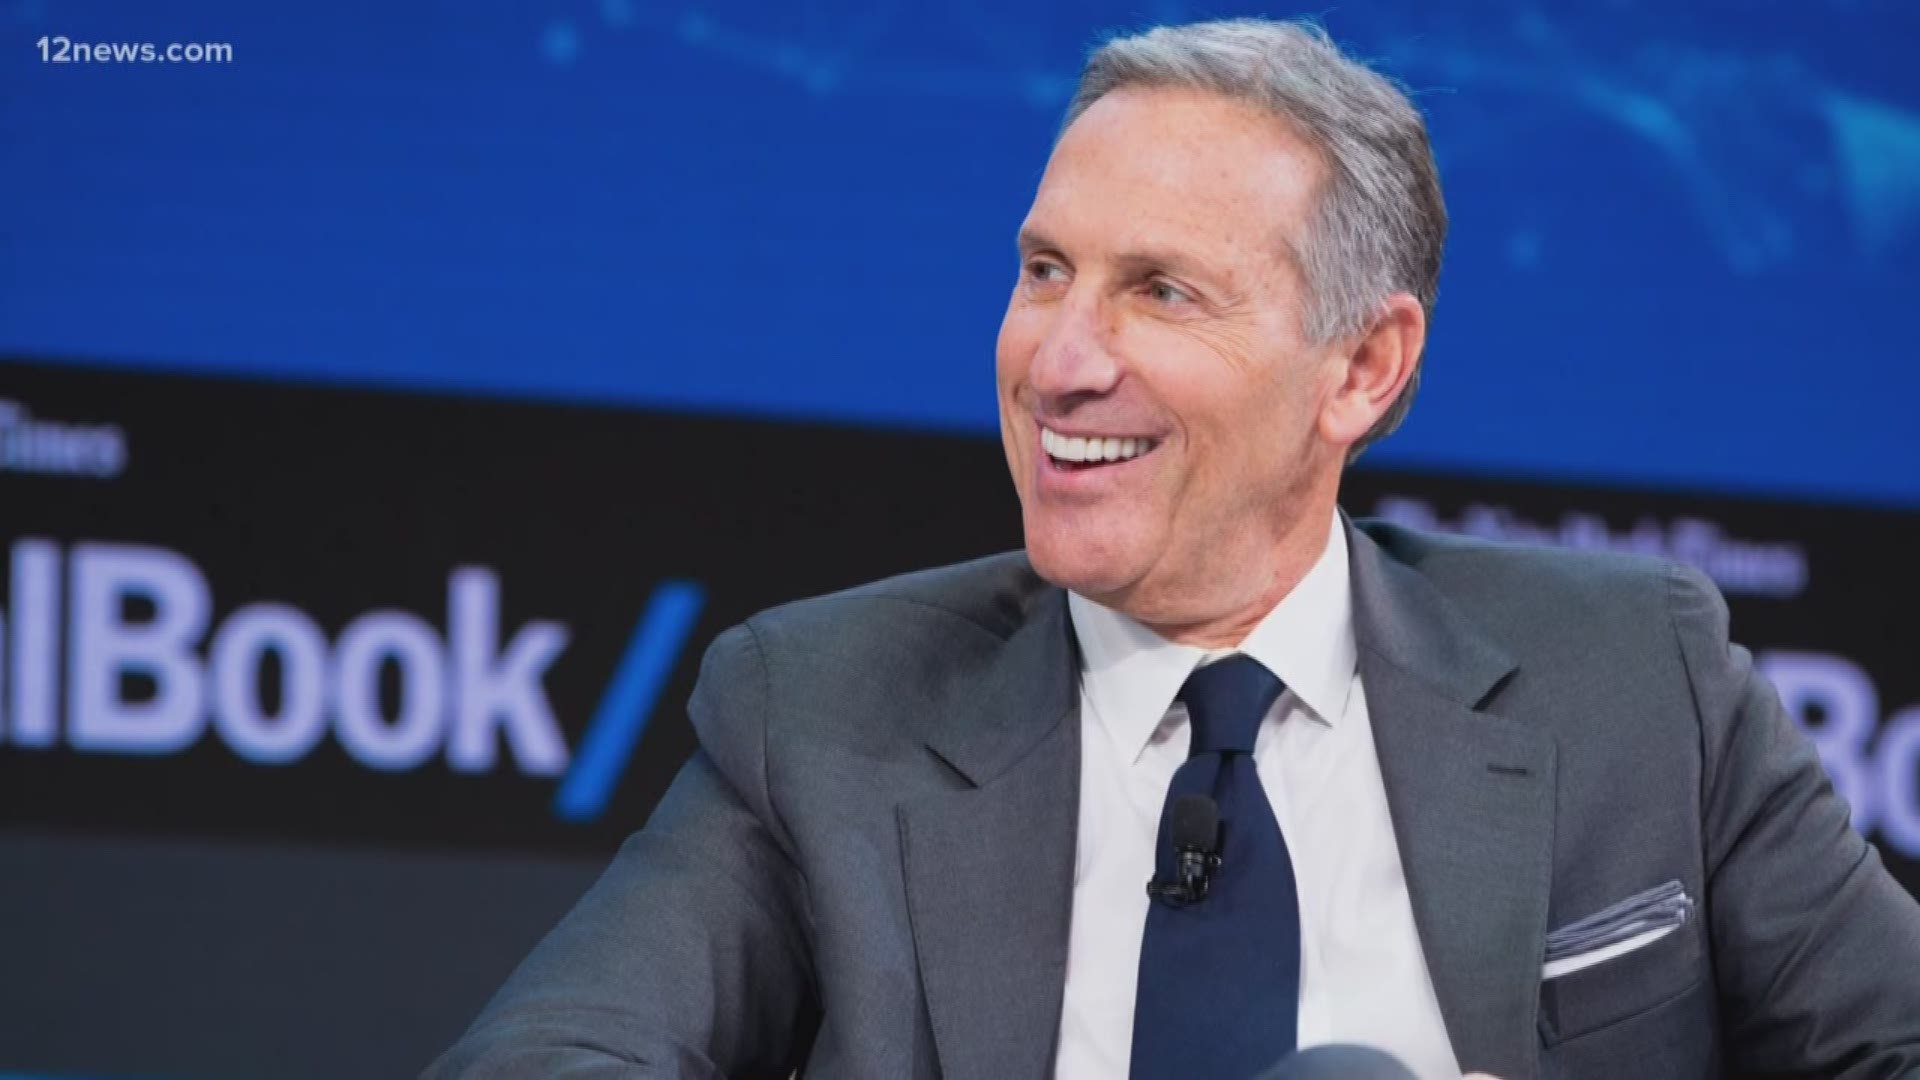 Starbucks CEO Howard Schultz is considering running for president as a centrist independent after stepping down from Starbucks in June.